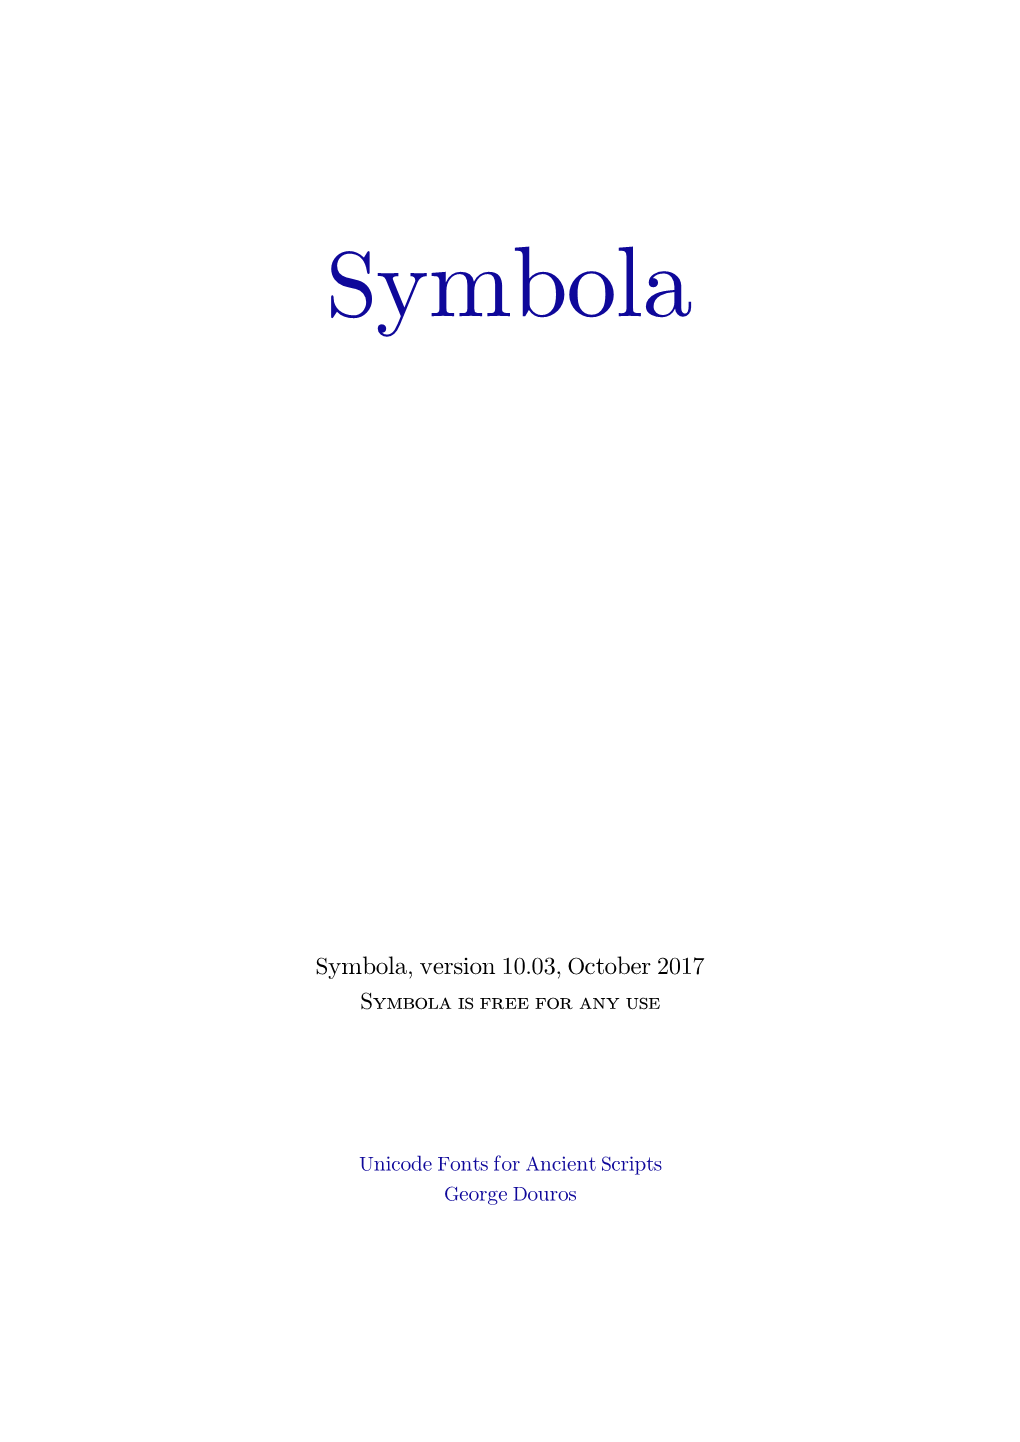 Character Repertoire of Symbola